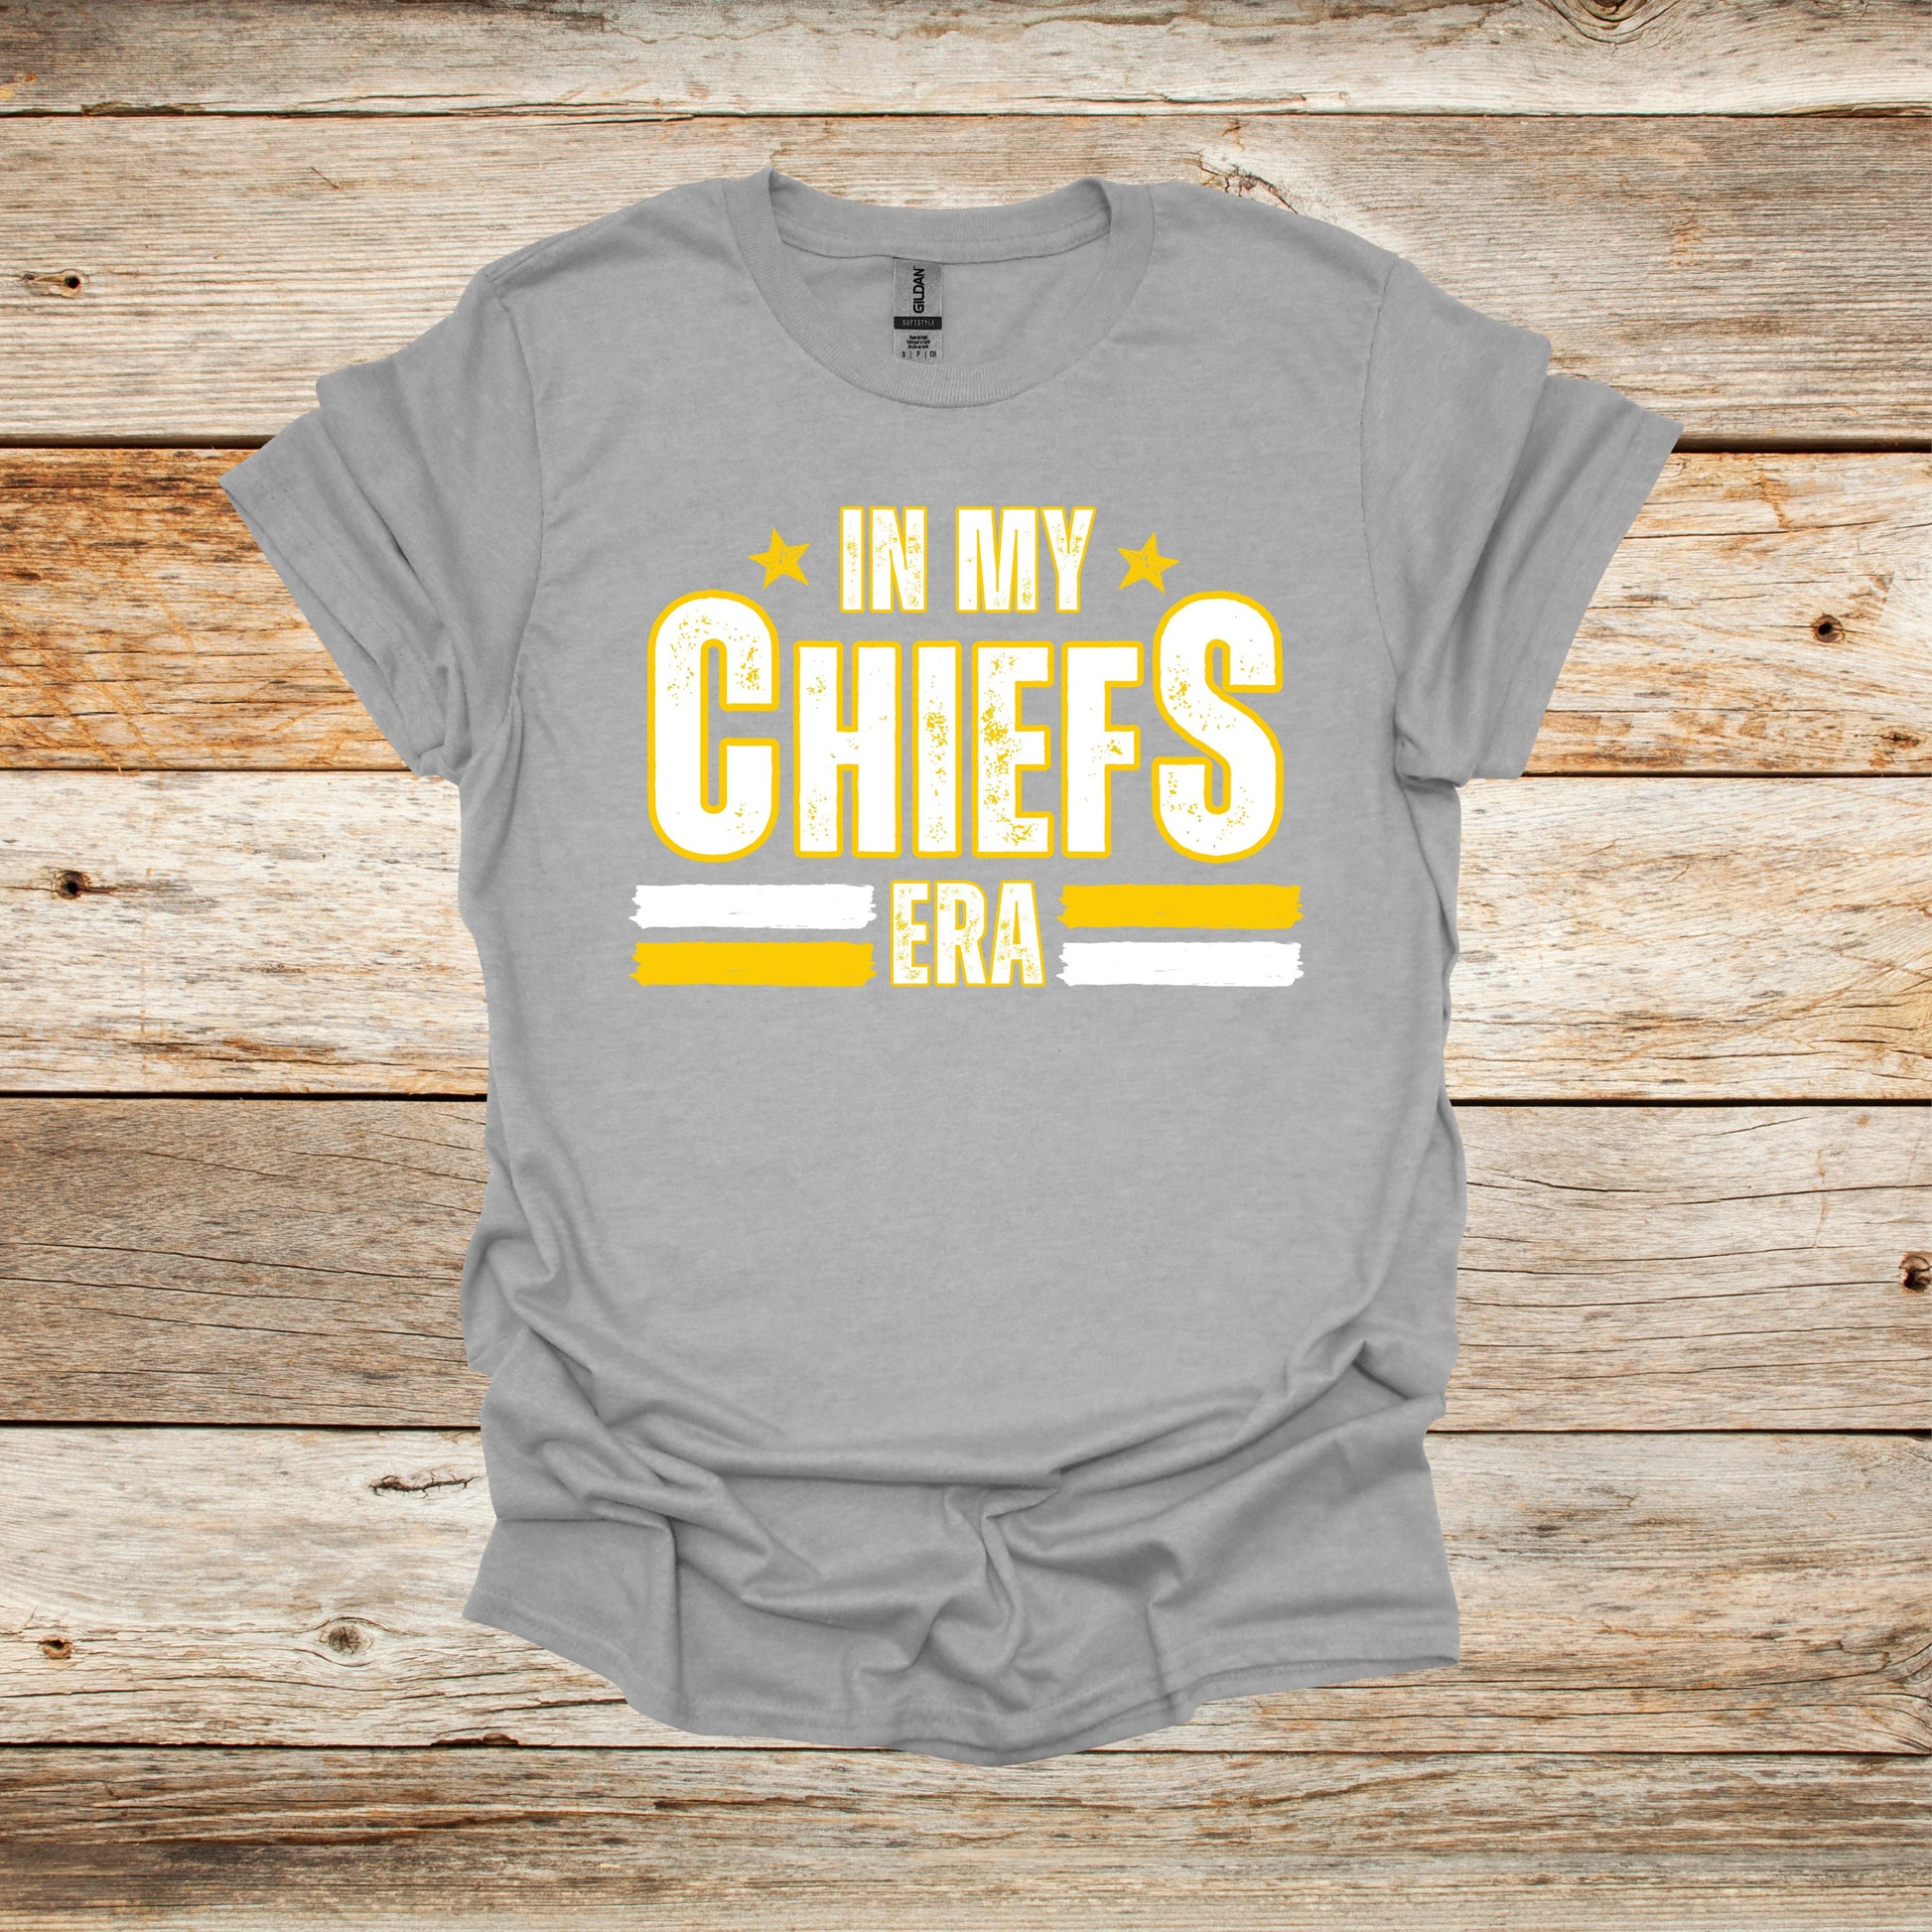 Football T-Shirt - In My Chiefs Era - Kansas City Chiefs - Adult and Children's Tee Shirts - Chiefs - Sports T-Shirts Graphic Avenue Sport Grey Adult Small 